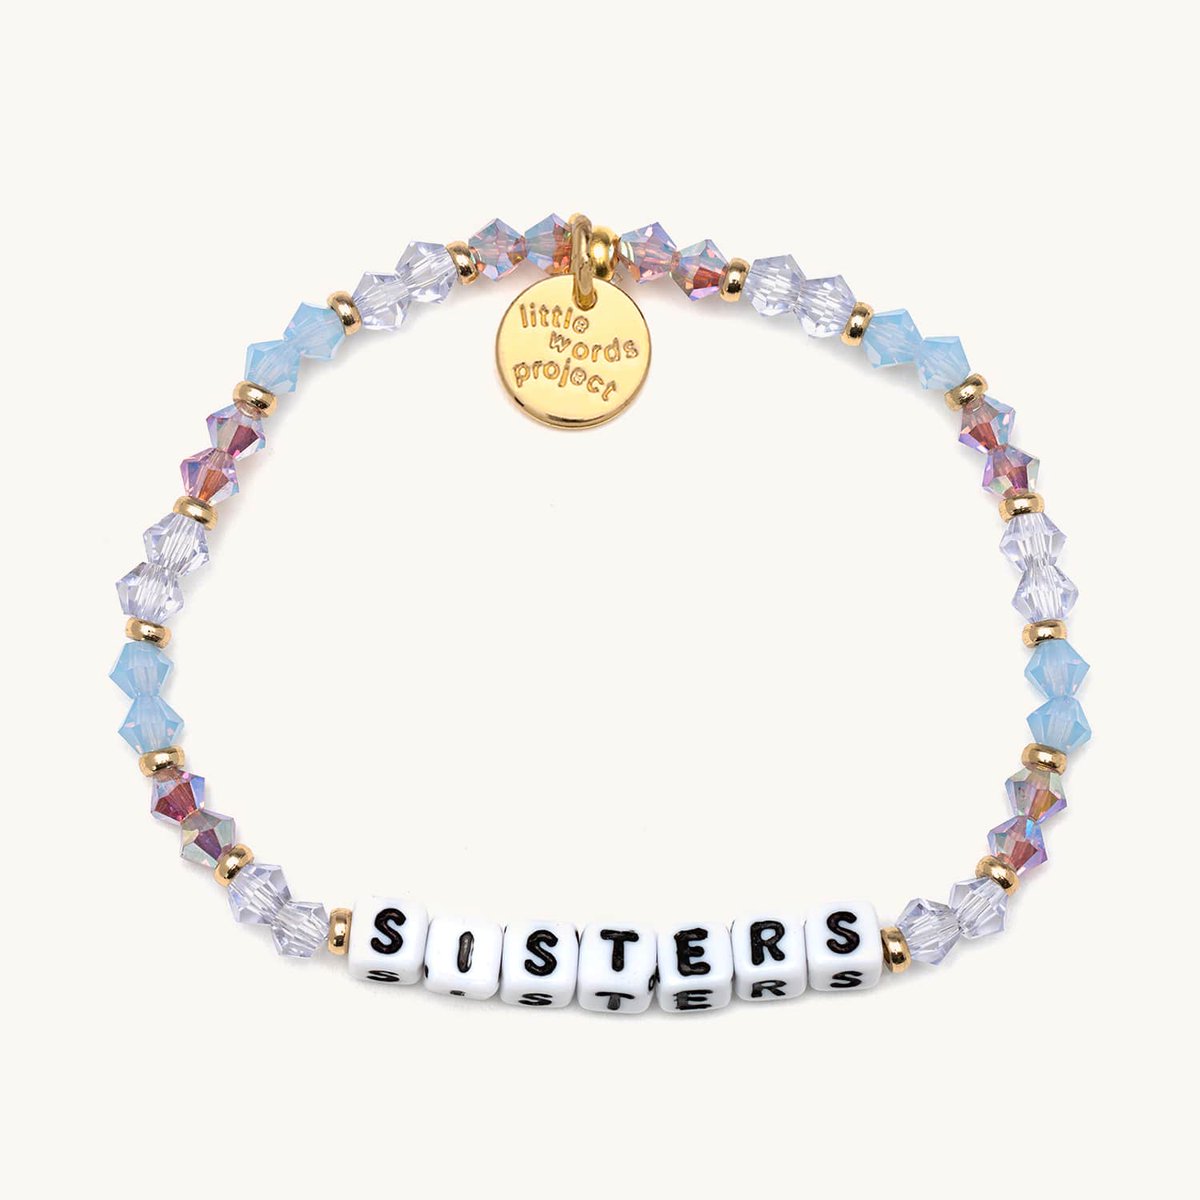 I love my 'Little Words Project' bracelets. They keep me mindful. <3
sldr.page.link/HBZm
Code: BAVERYMARY to save 15% off.
#LittleWordsProject #teens #womensgifts #fashionjewelry #giftsforher #pretty #cute #kawaii #birthdaygifts #teenstyle #everydaygifts #inspirational